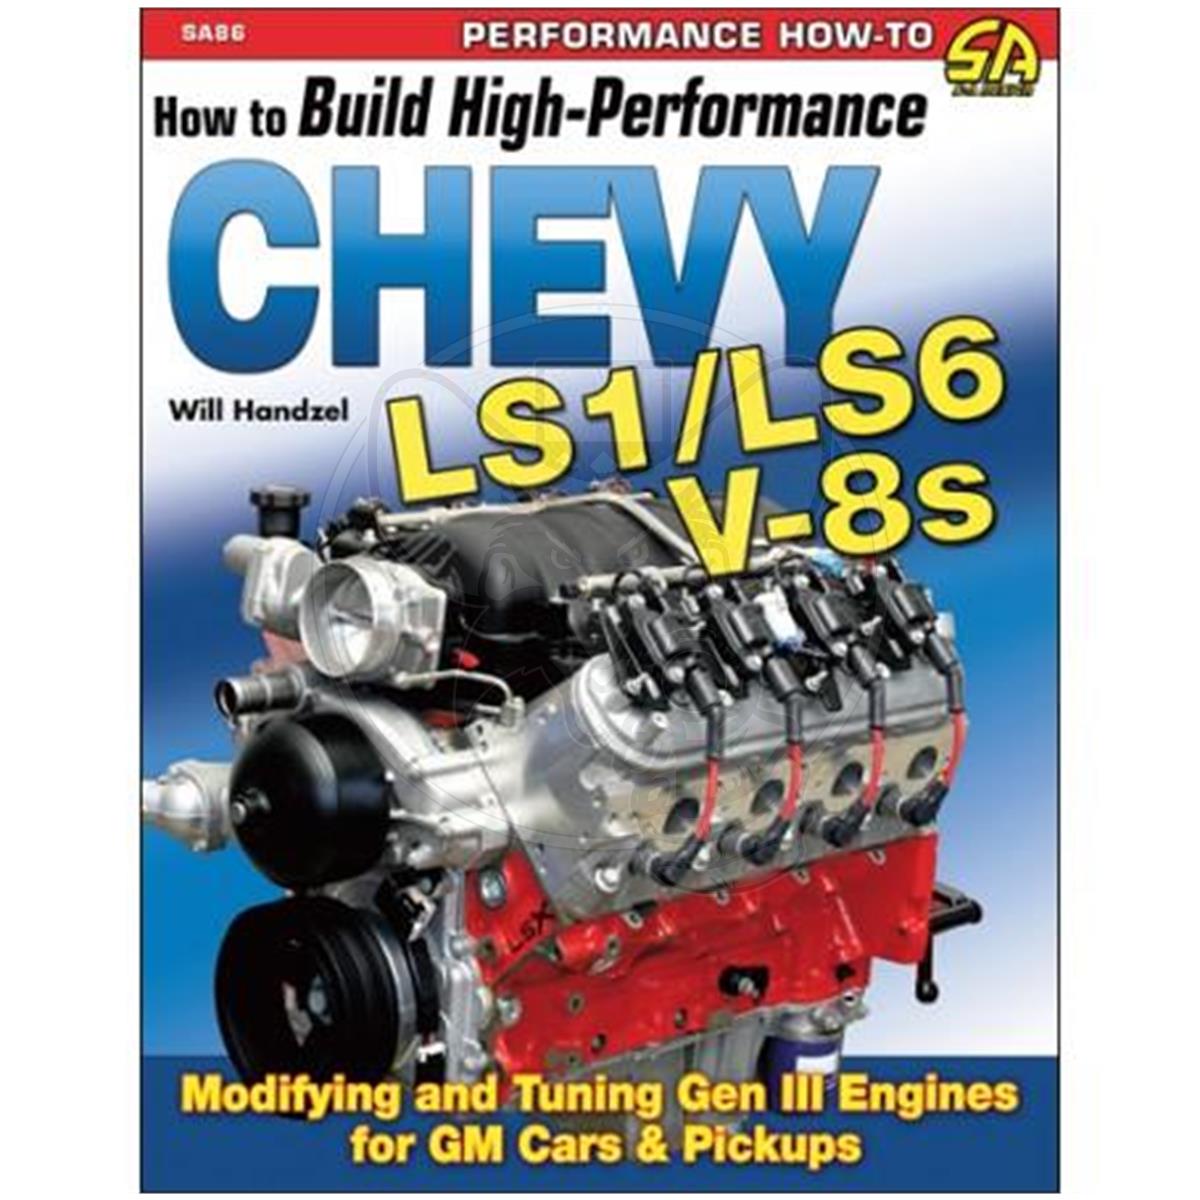 SA DESIGN BOOK HOW TO BUILD PERFORMANCE FOR GM CHEVY V8 LS1-LS6 LS ENG